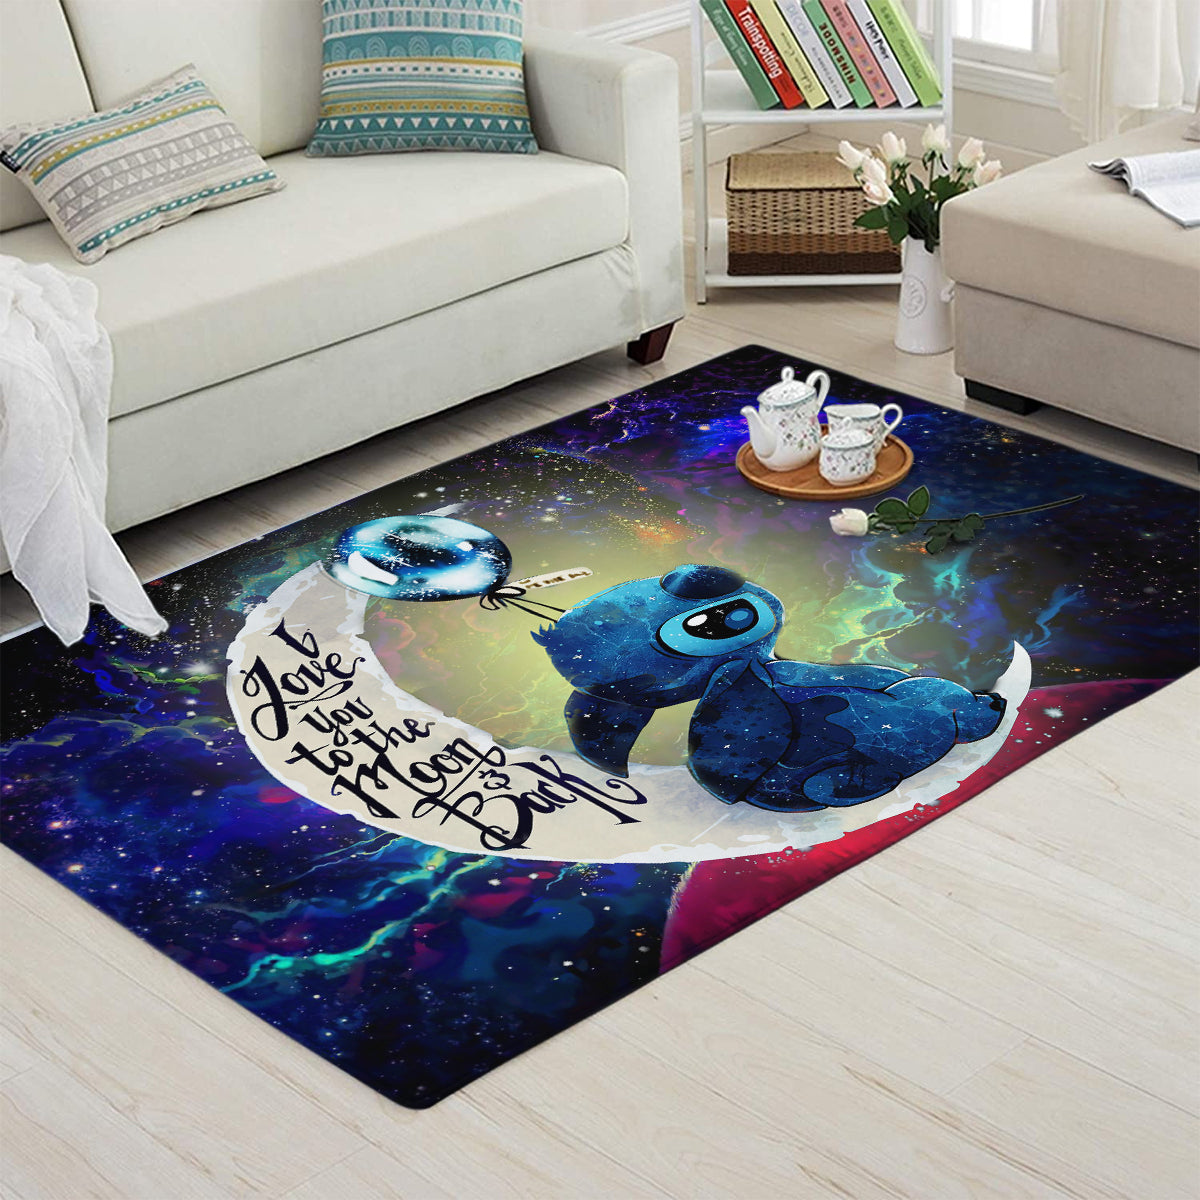 Stitch Love You To The Moon Galaxy Carpet Rug Home Room Decor